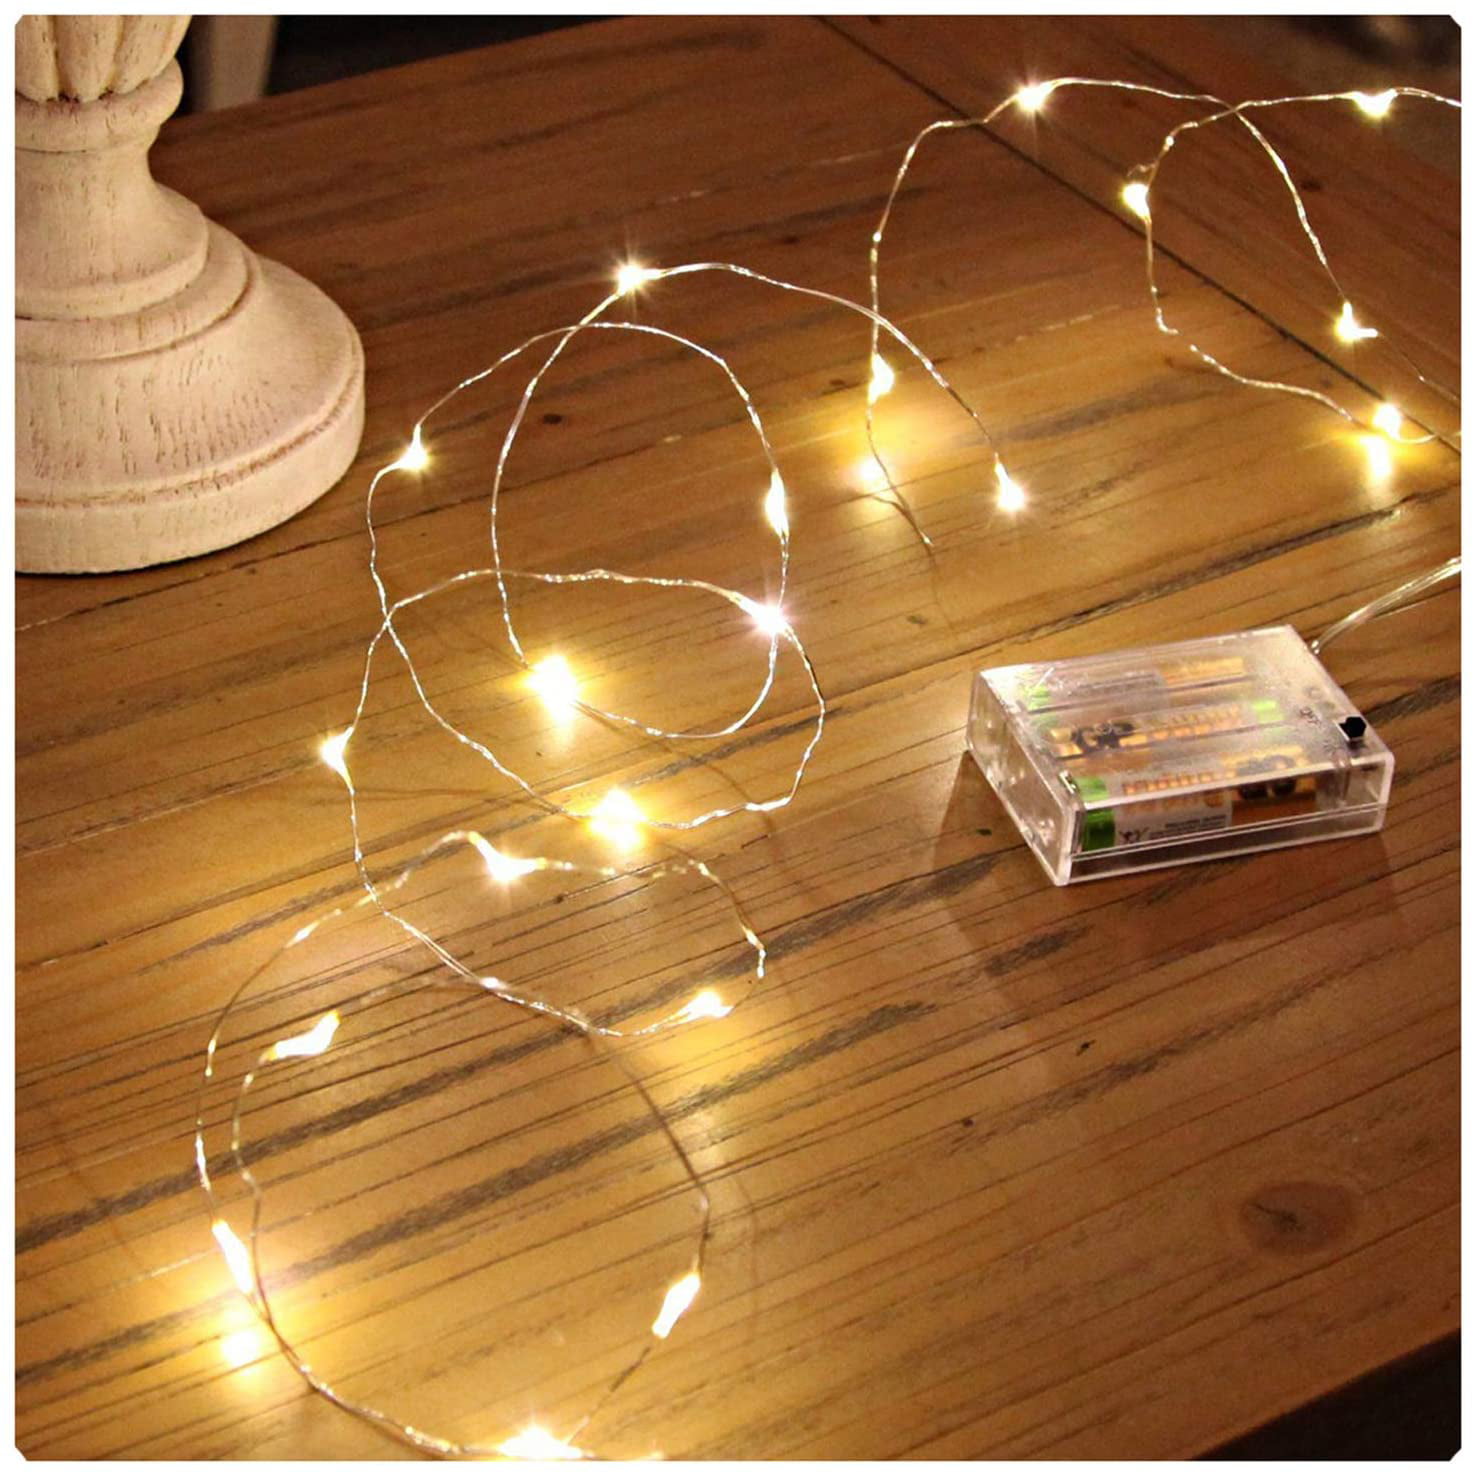 5M Led String Lights Mini Battery Powered Copper Wire Starry Fairy Lights for Bedroom Parties Wedding Christmas